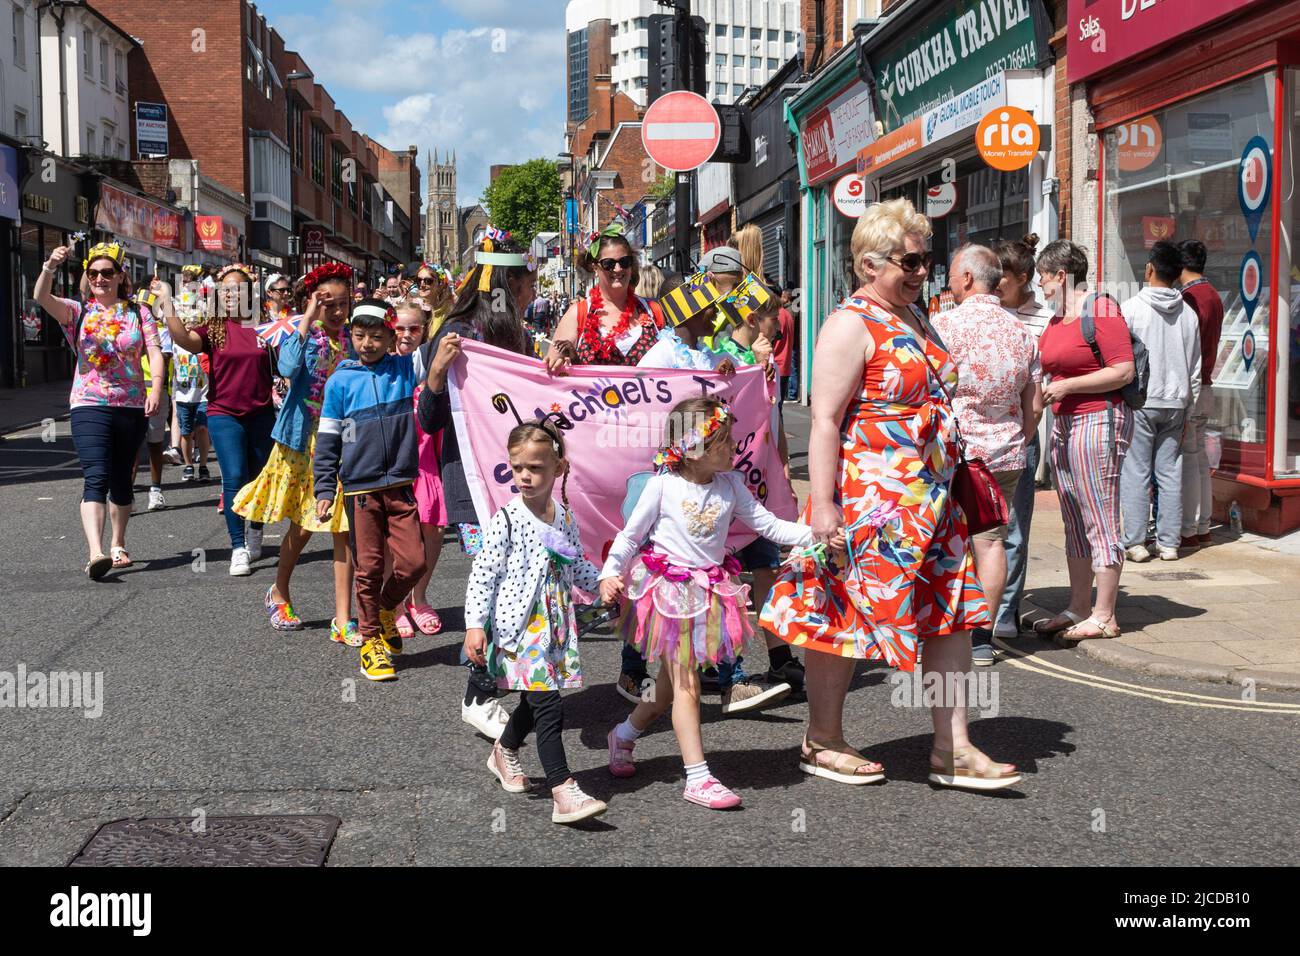 School children taking part in the Grand Parade at Victoria Day, an annual event in Aldershot, Hampshire, England, UK Stock Photo